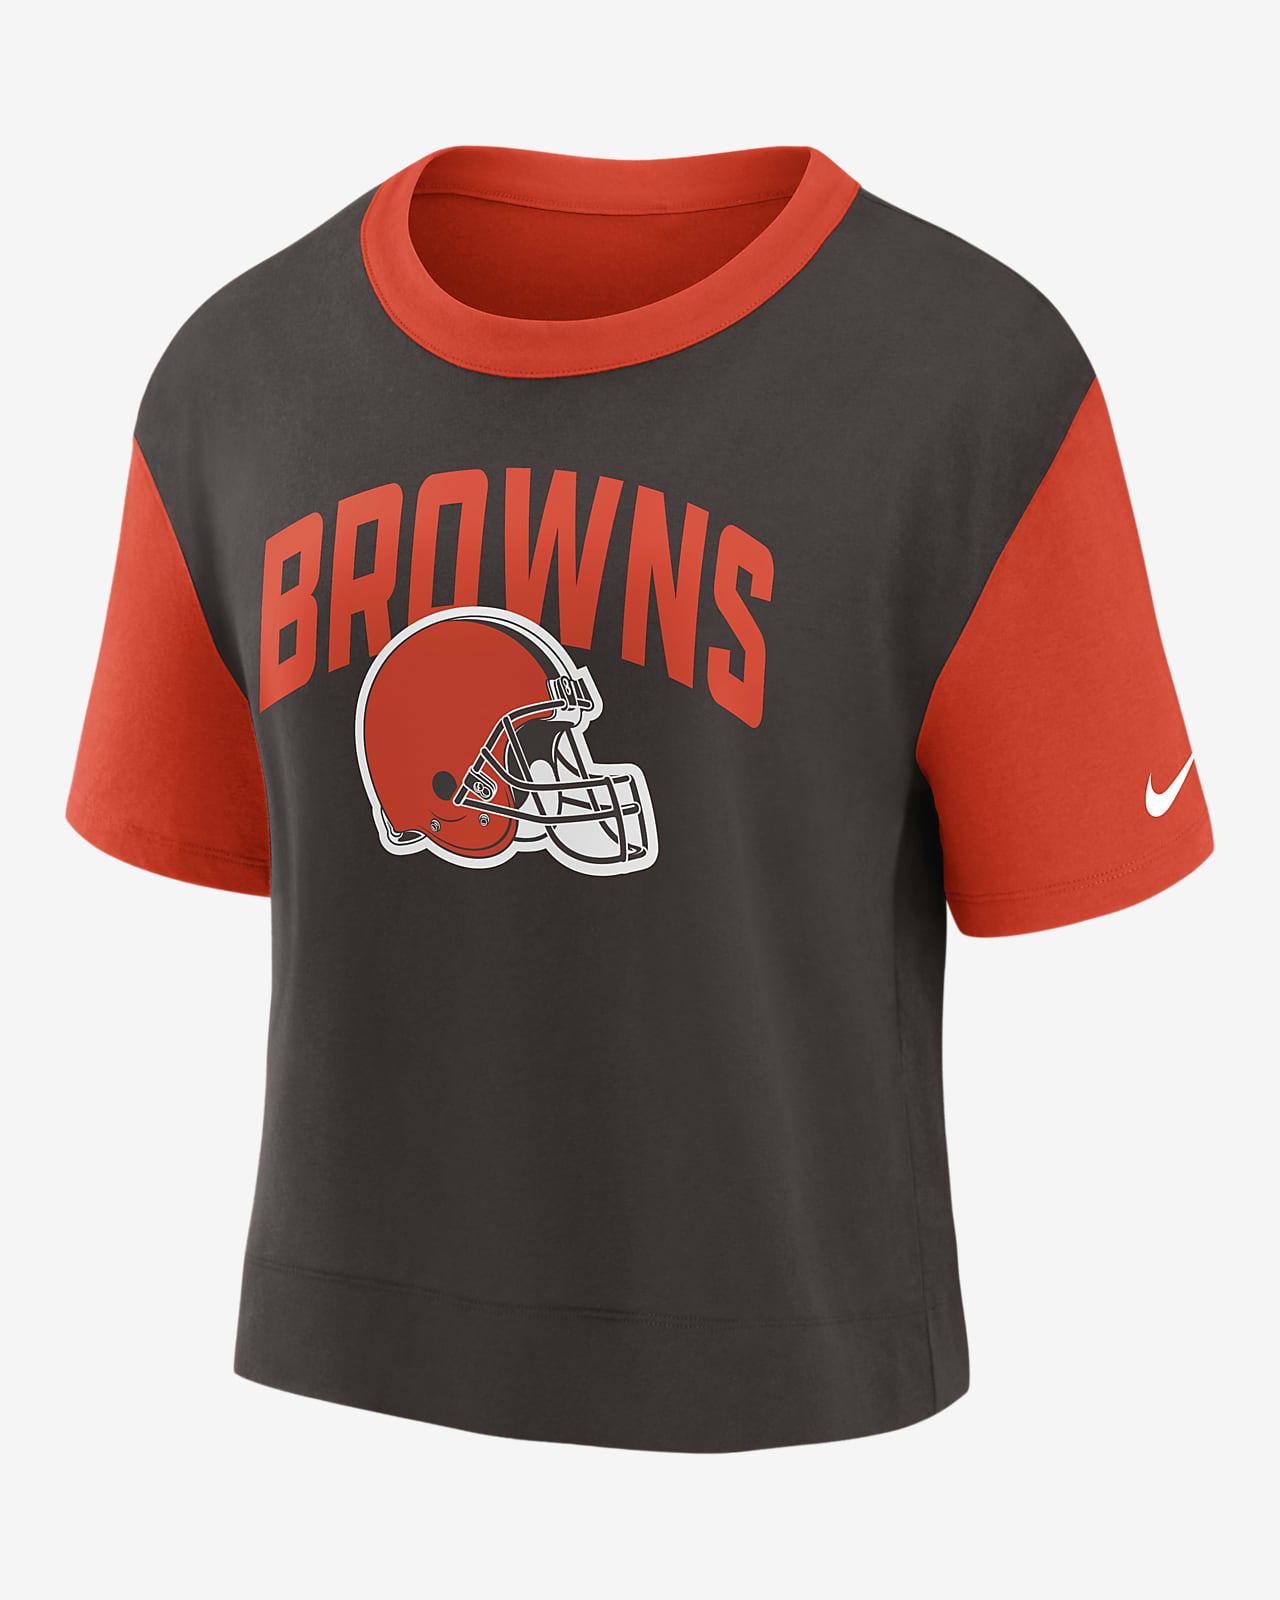 Women's Cleveland Browns Graphic Oversized Sunday Crew, Women's Sale